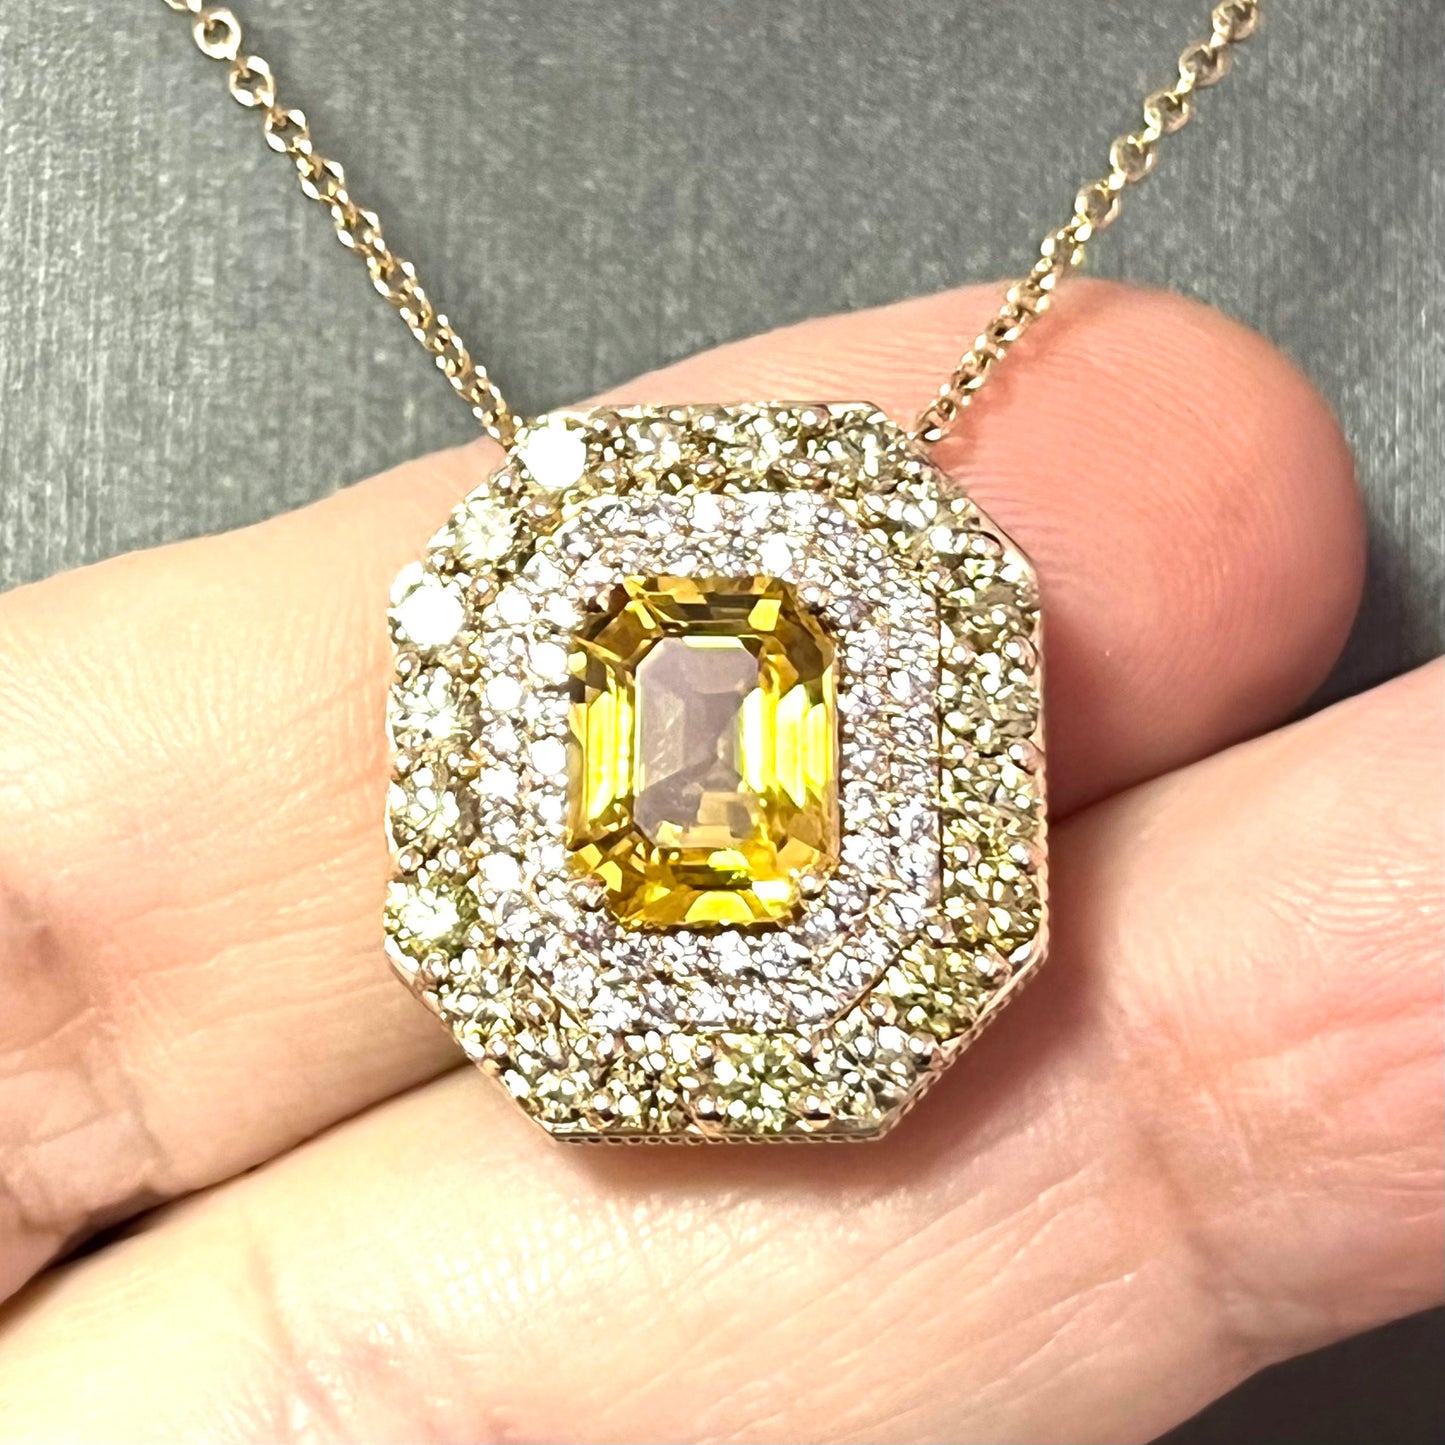 Natural Sapphire Diamond Necklace 14k Gold 6.53 TCW Certified $16,950 212085 - Certified Estate Jewelry